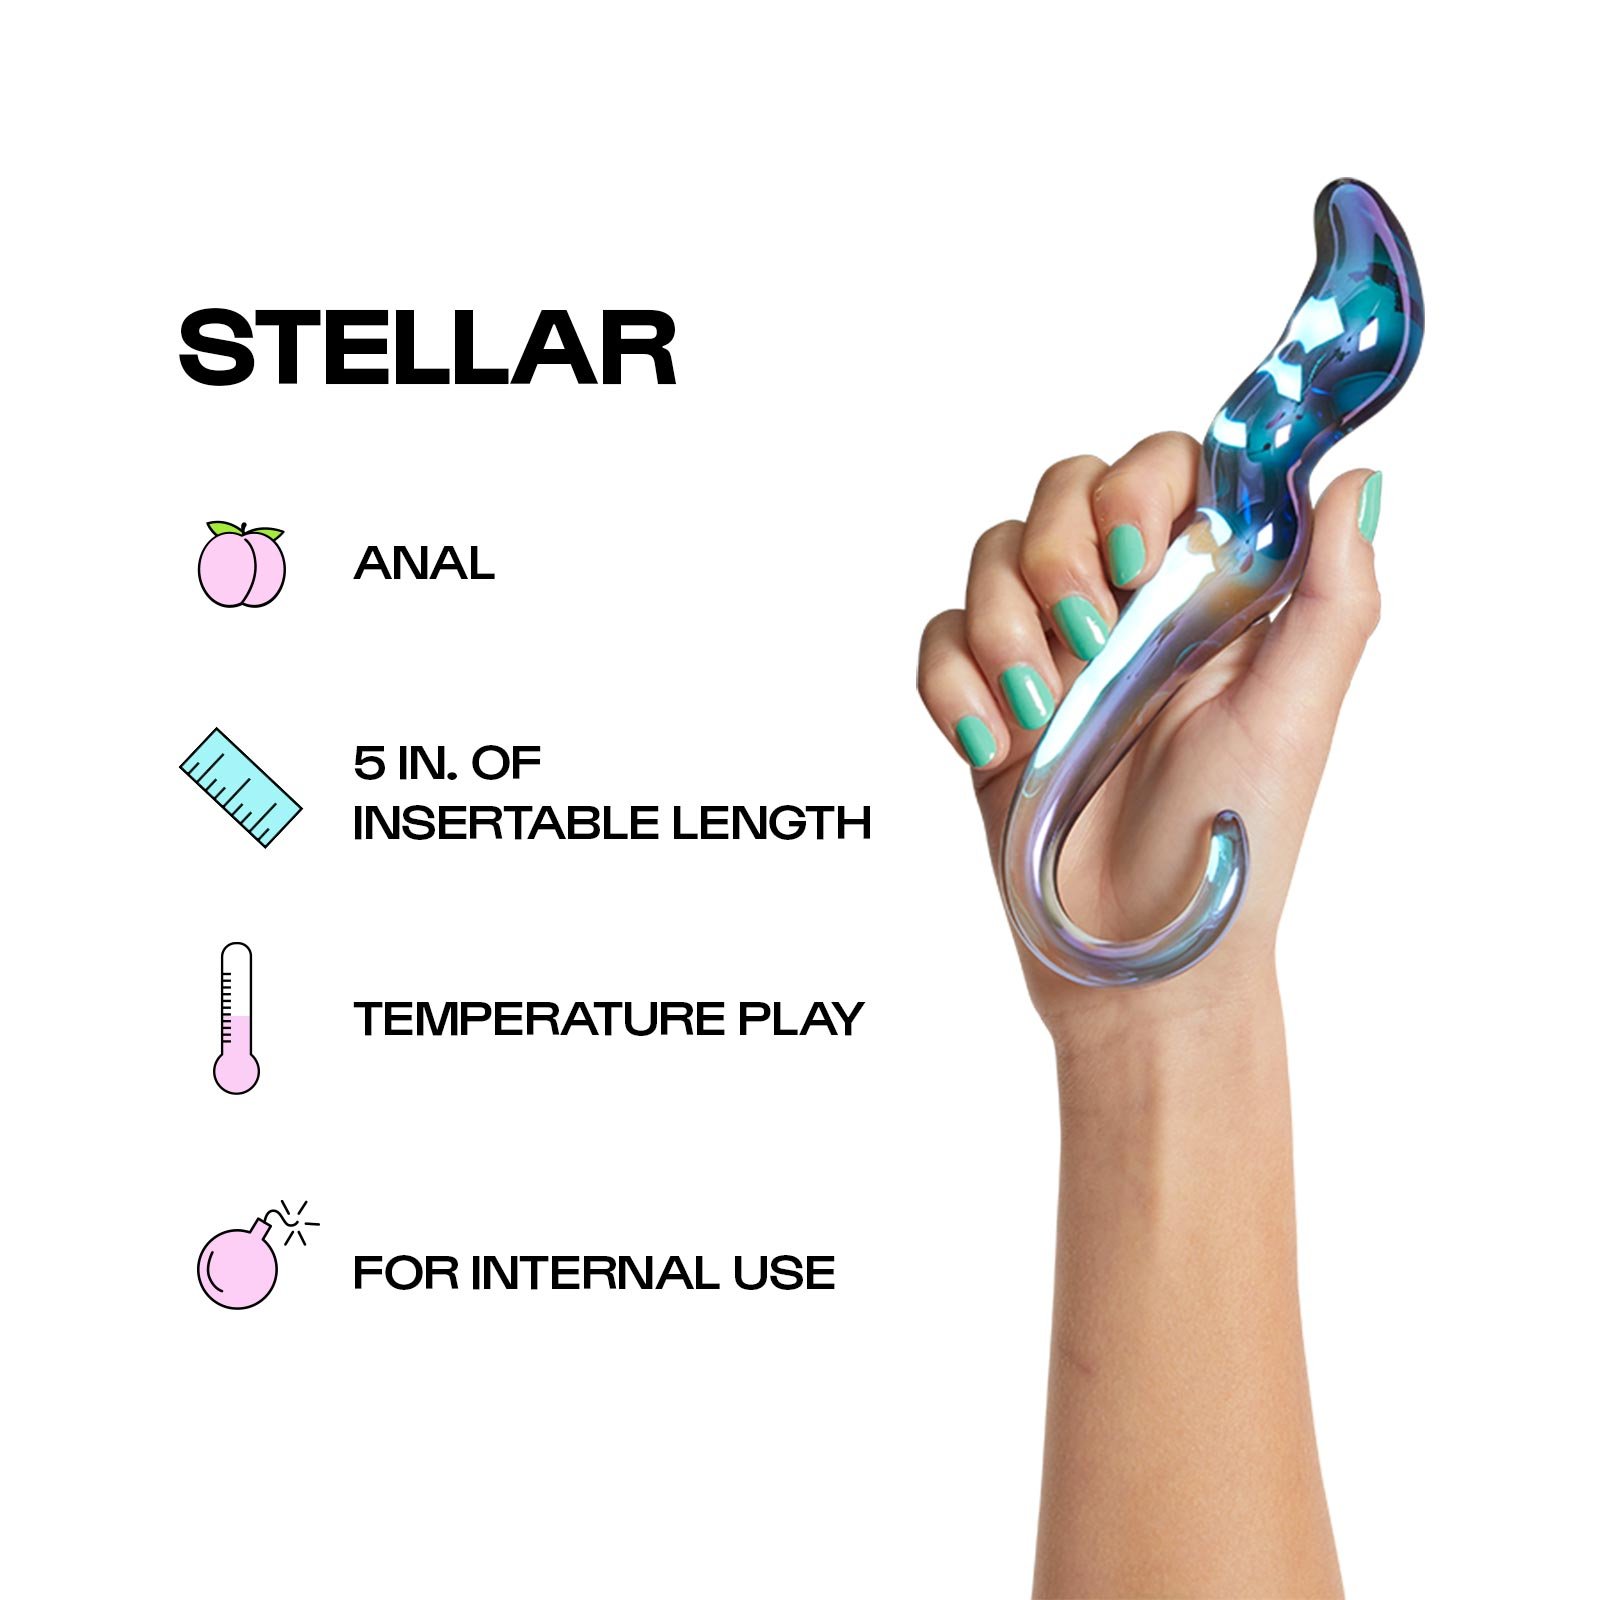 stellar is for anal use, 5 inches of insertable length temperature play, for internal use